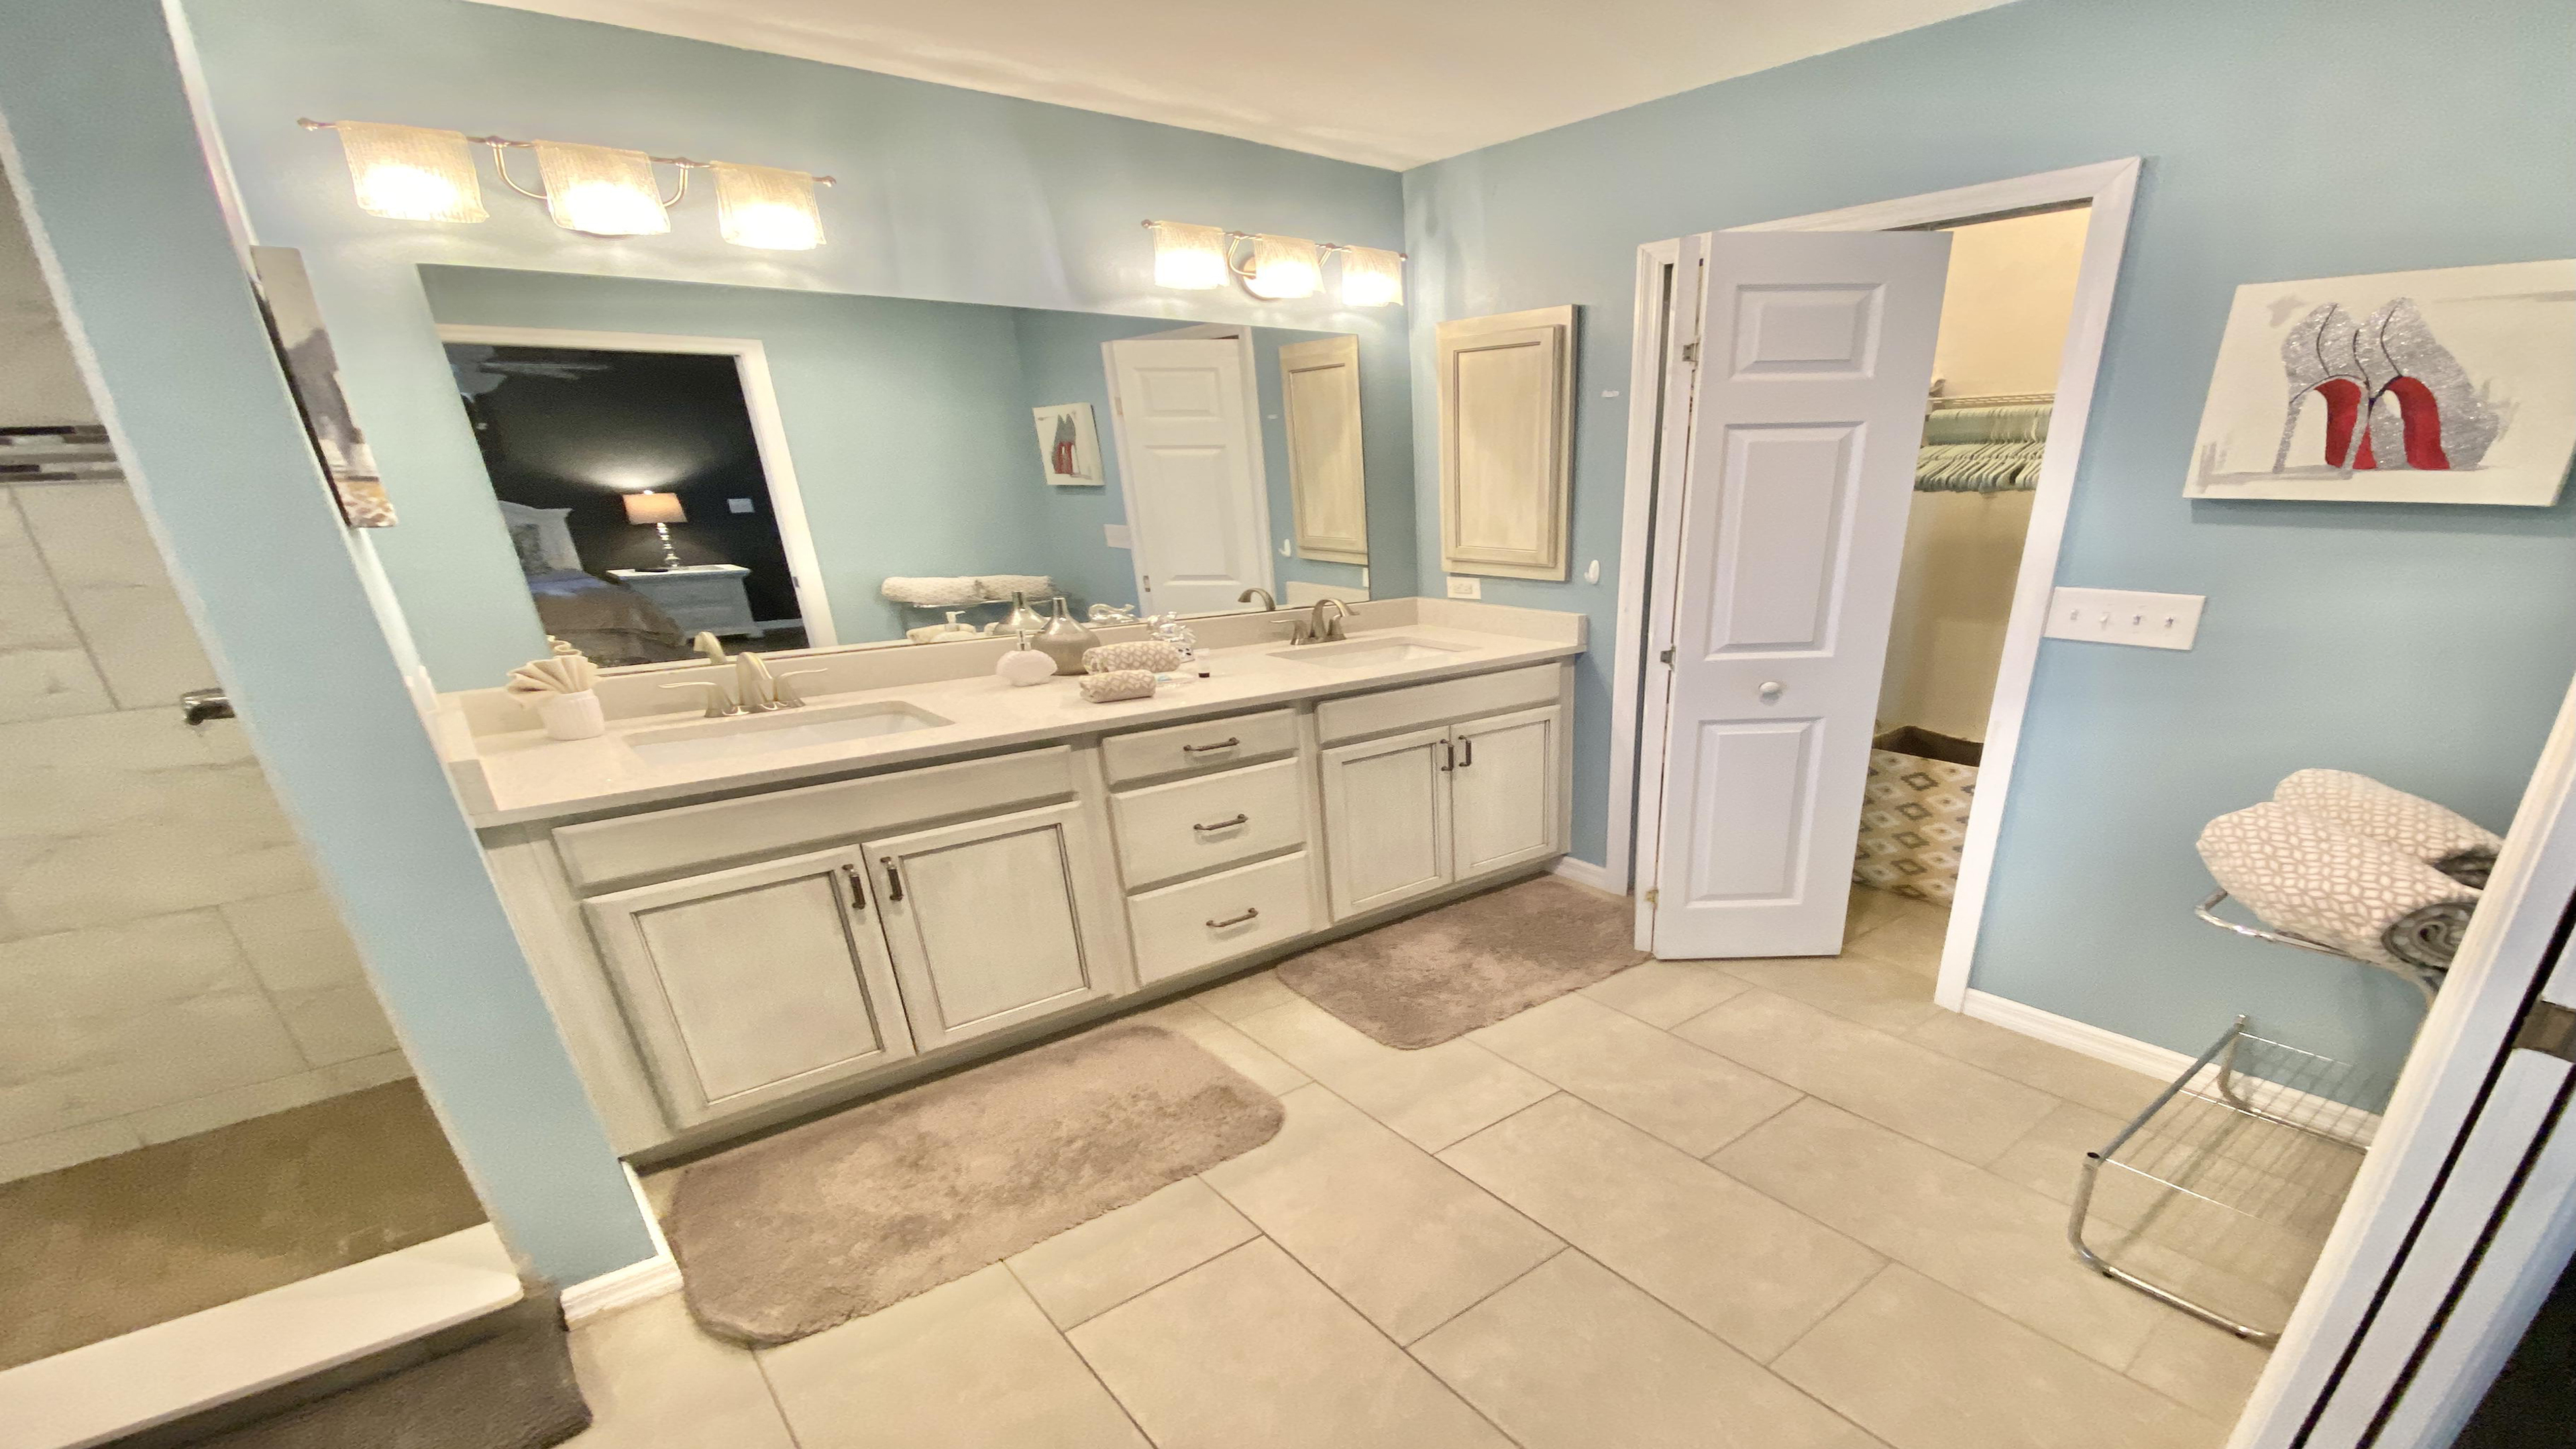 The adjacent master bath features double sinks and a shower